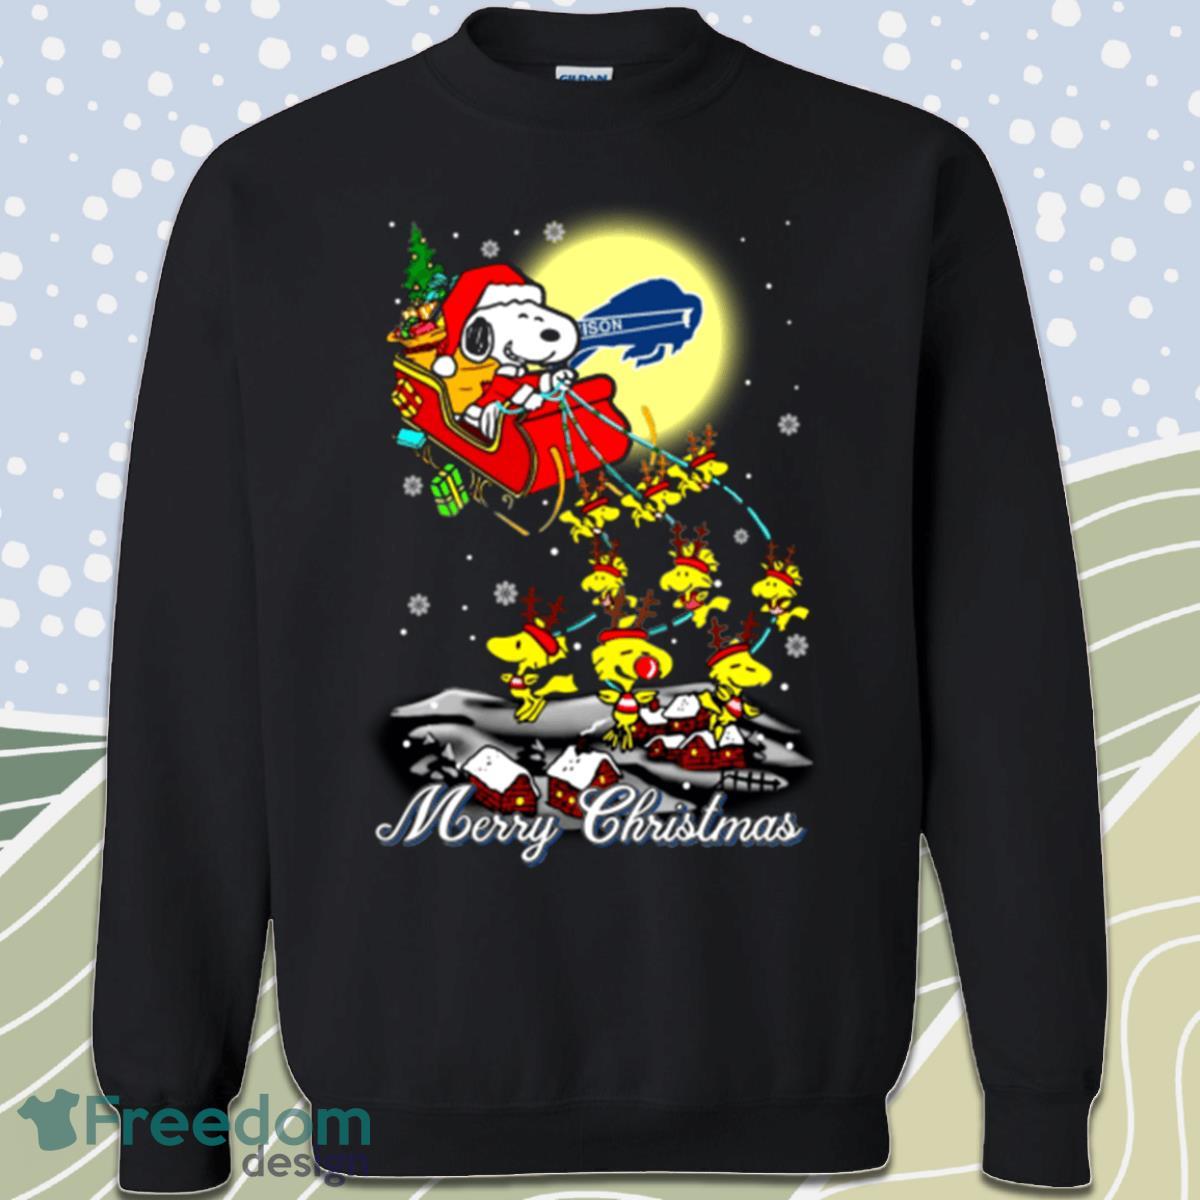 Spectacular Howard Bison Snoopy Santa Claus With Sleigh Sweatshirts Product Photo 1